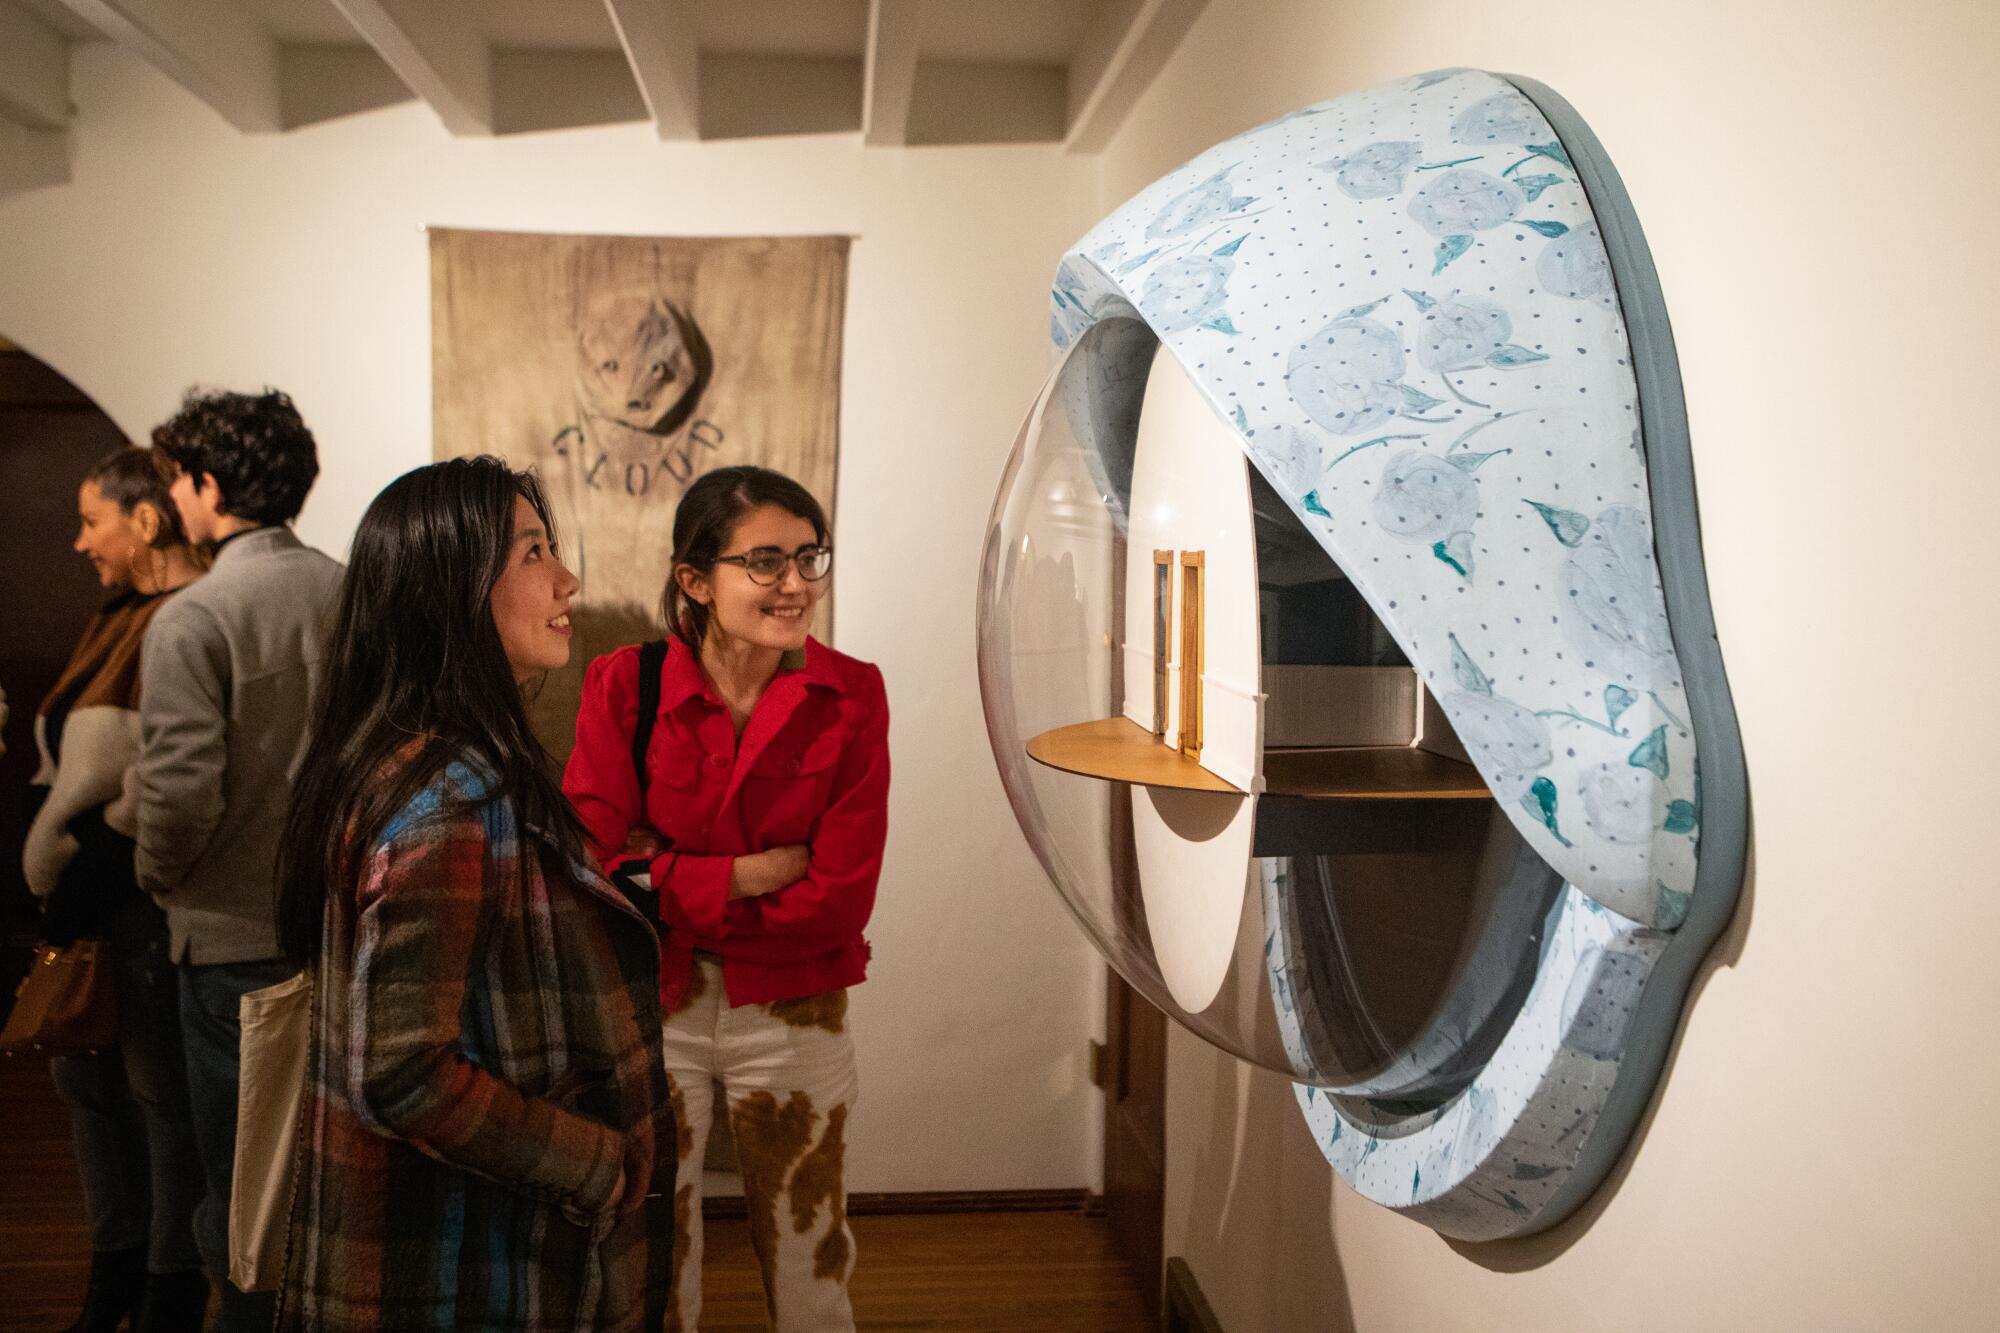 Two women look at an art piece hanging on a wall. It resembles a large, open eye.